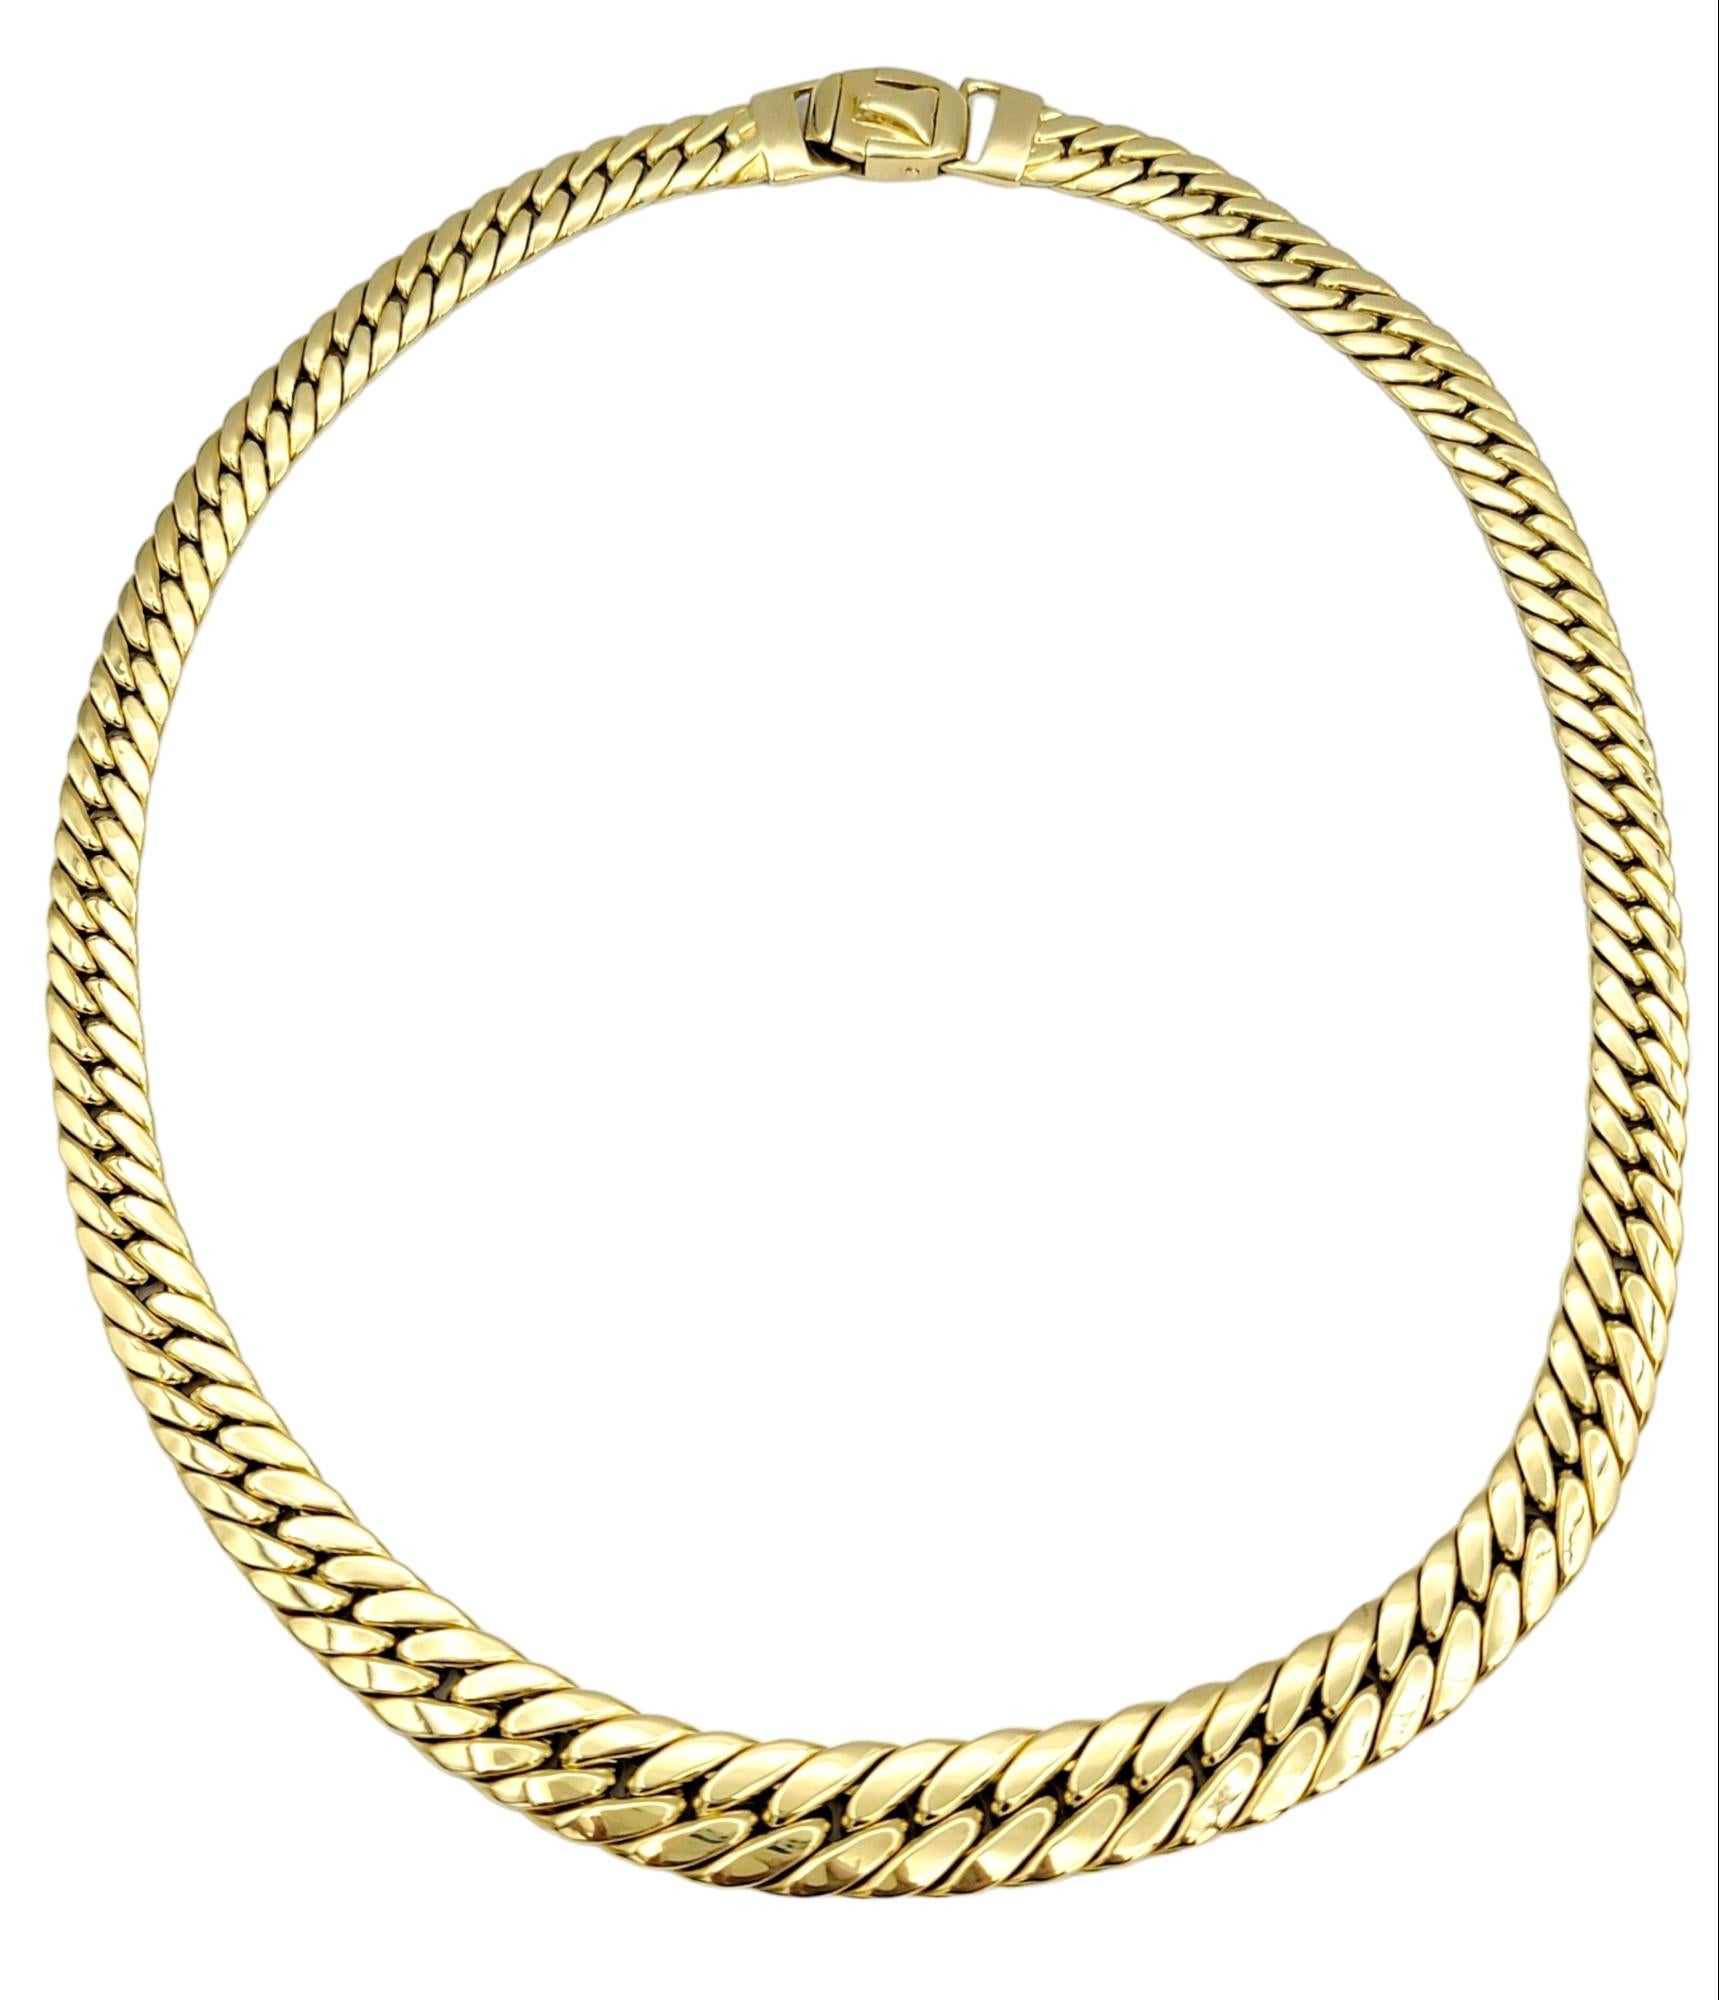 This resplendent curb link chain necklace, crafted in sumptuous 18 karat yellow gold, is a masterpiece of design and craftsmanship. Its distinct allure lies in the artful arrangement of links, creating a captivating visual journey from the